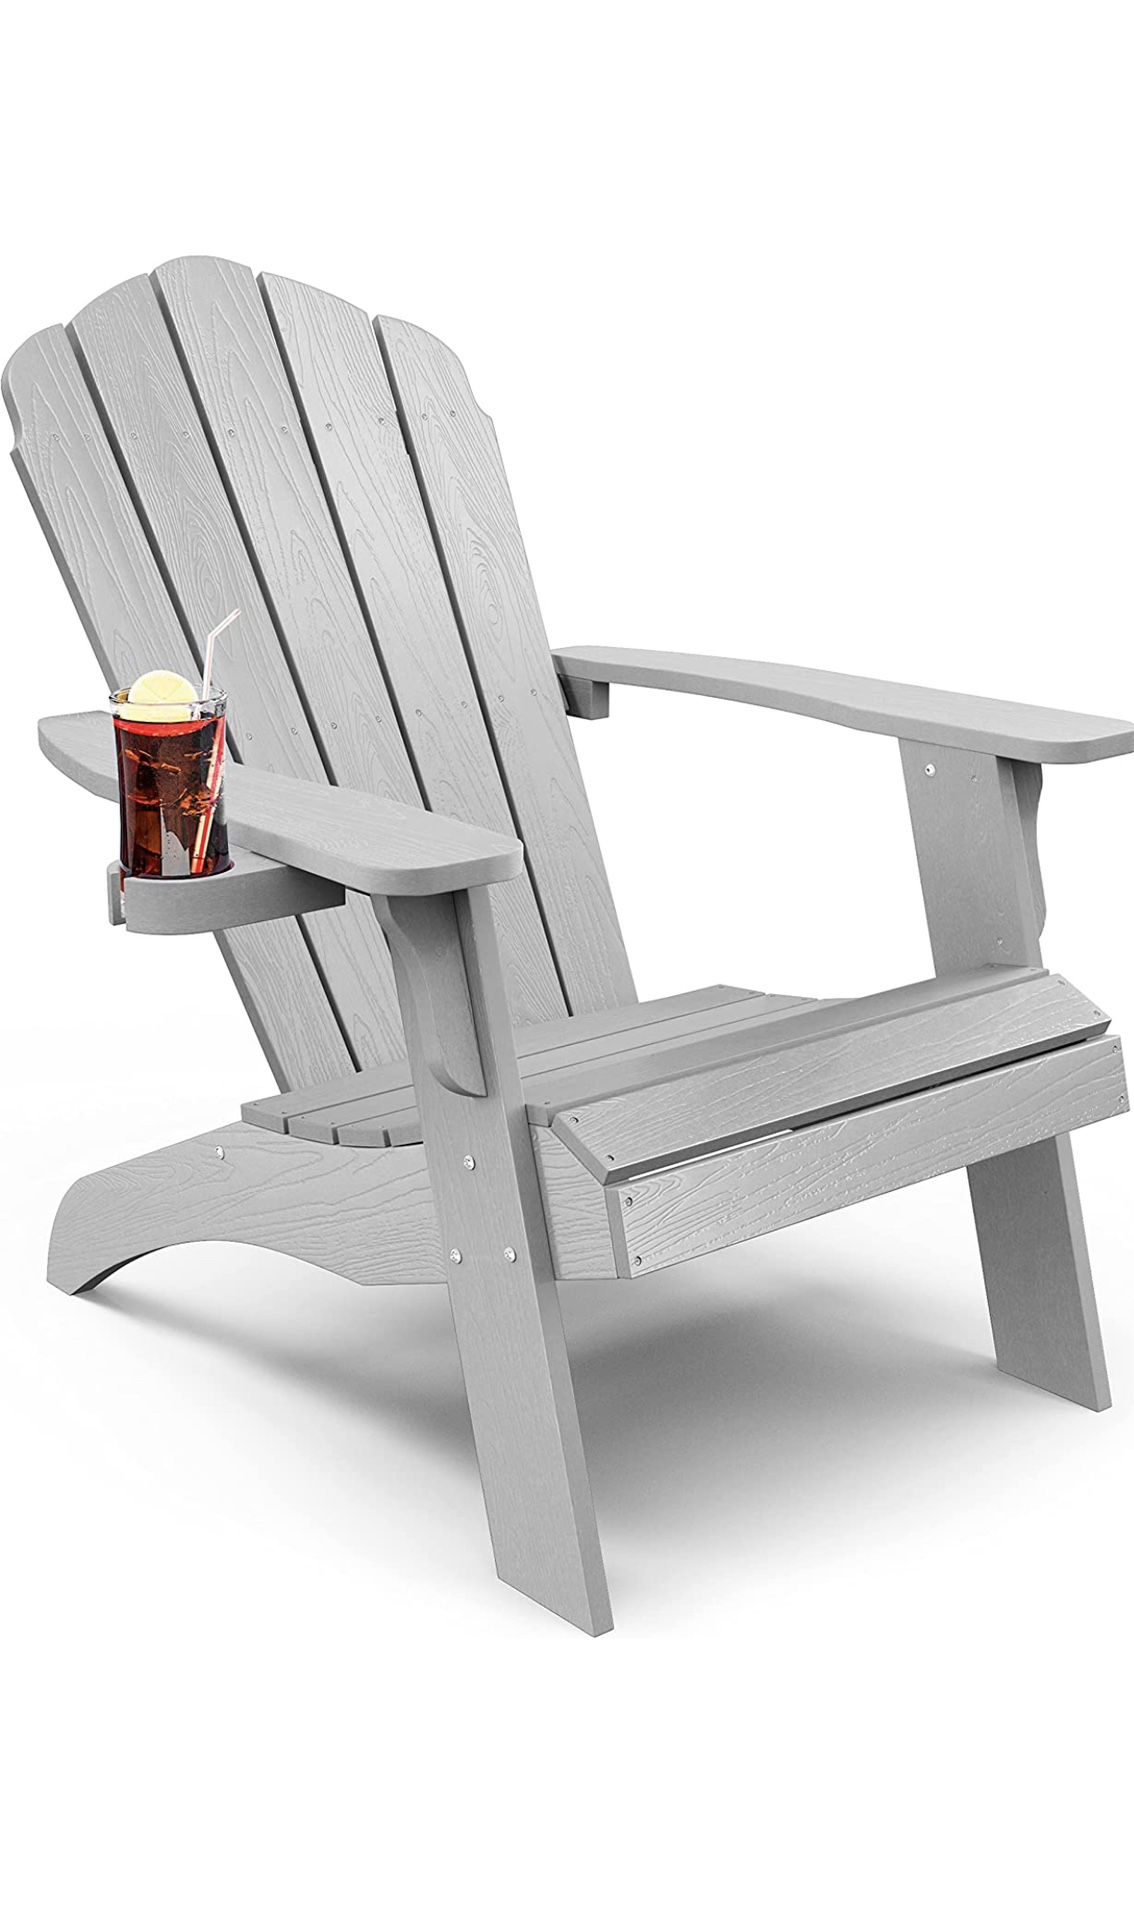 YEFU Oversized Plastic Adirondack Chair with Cup-Holder (Large Dual-Purpose), Weather Resistant, Po